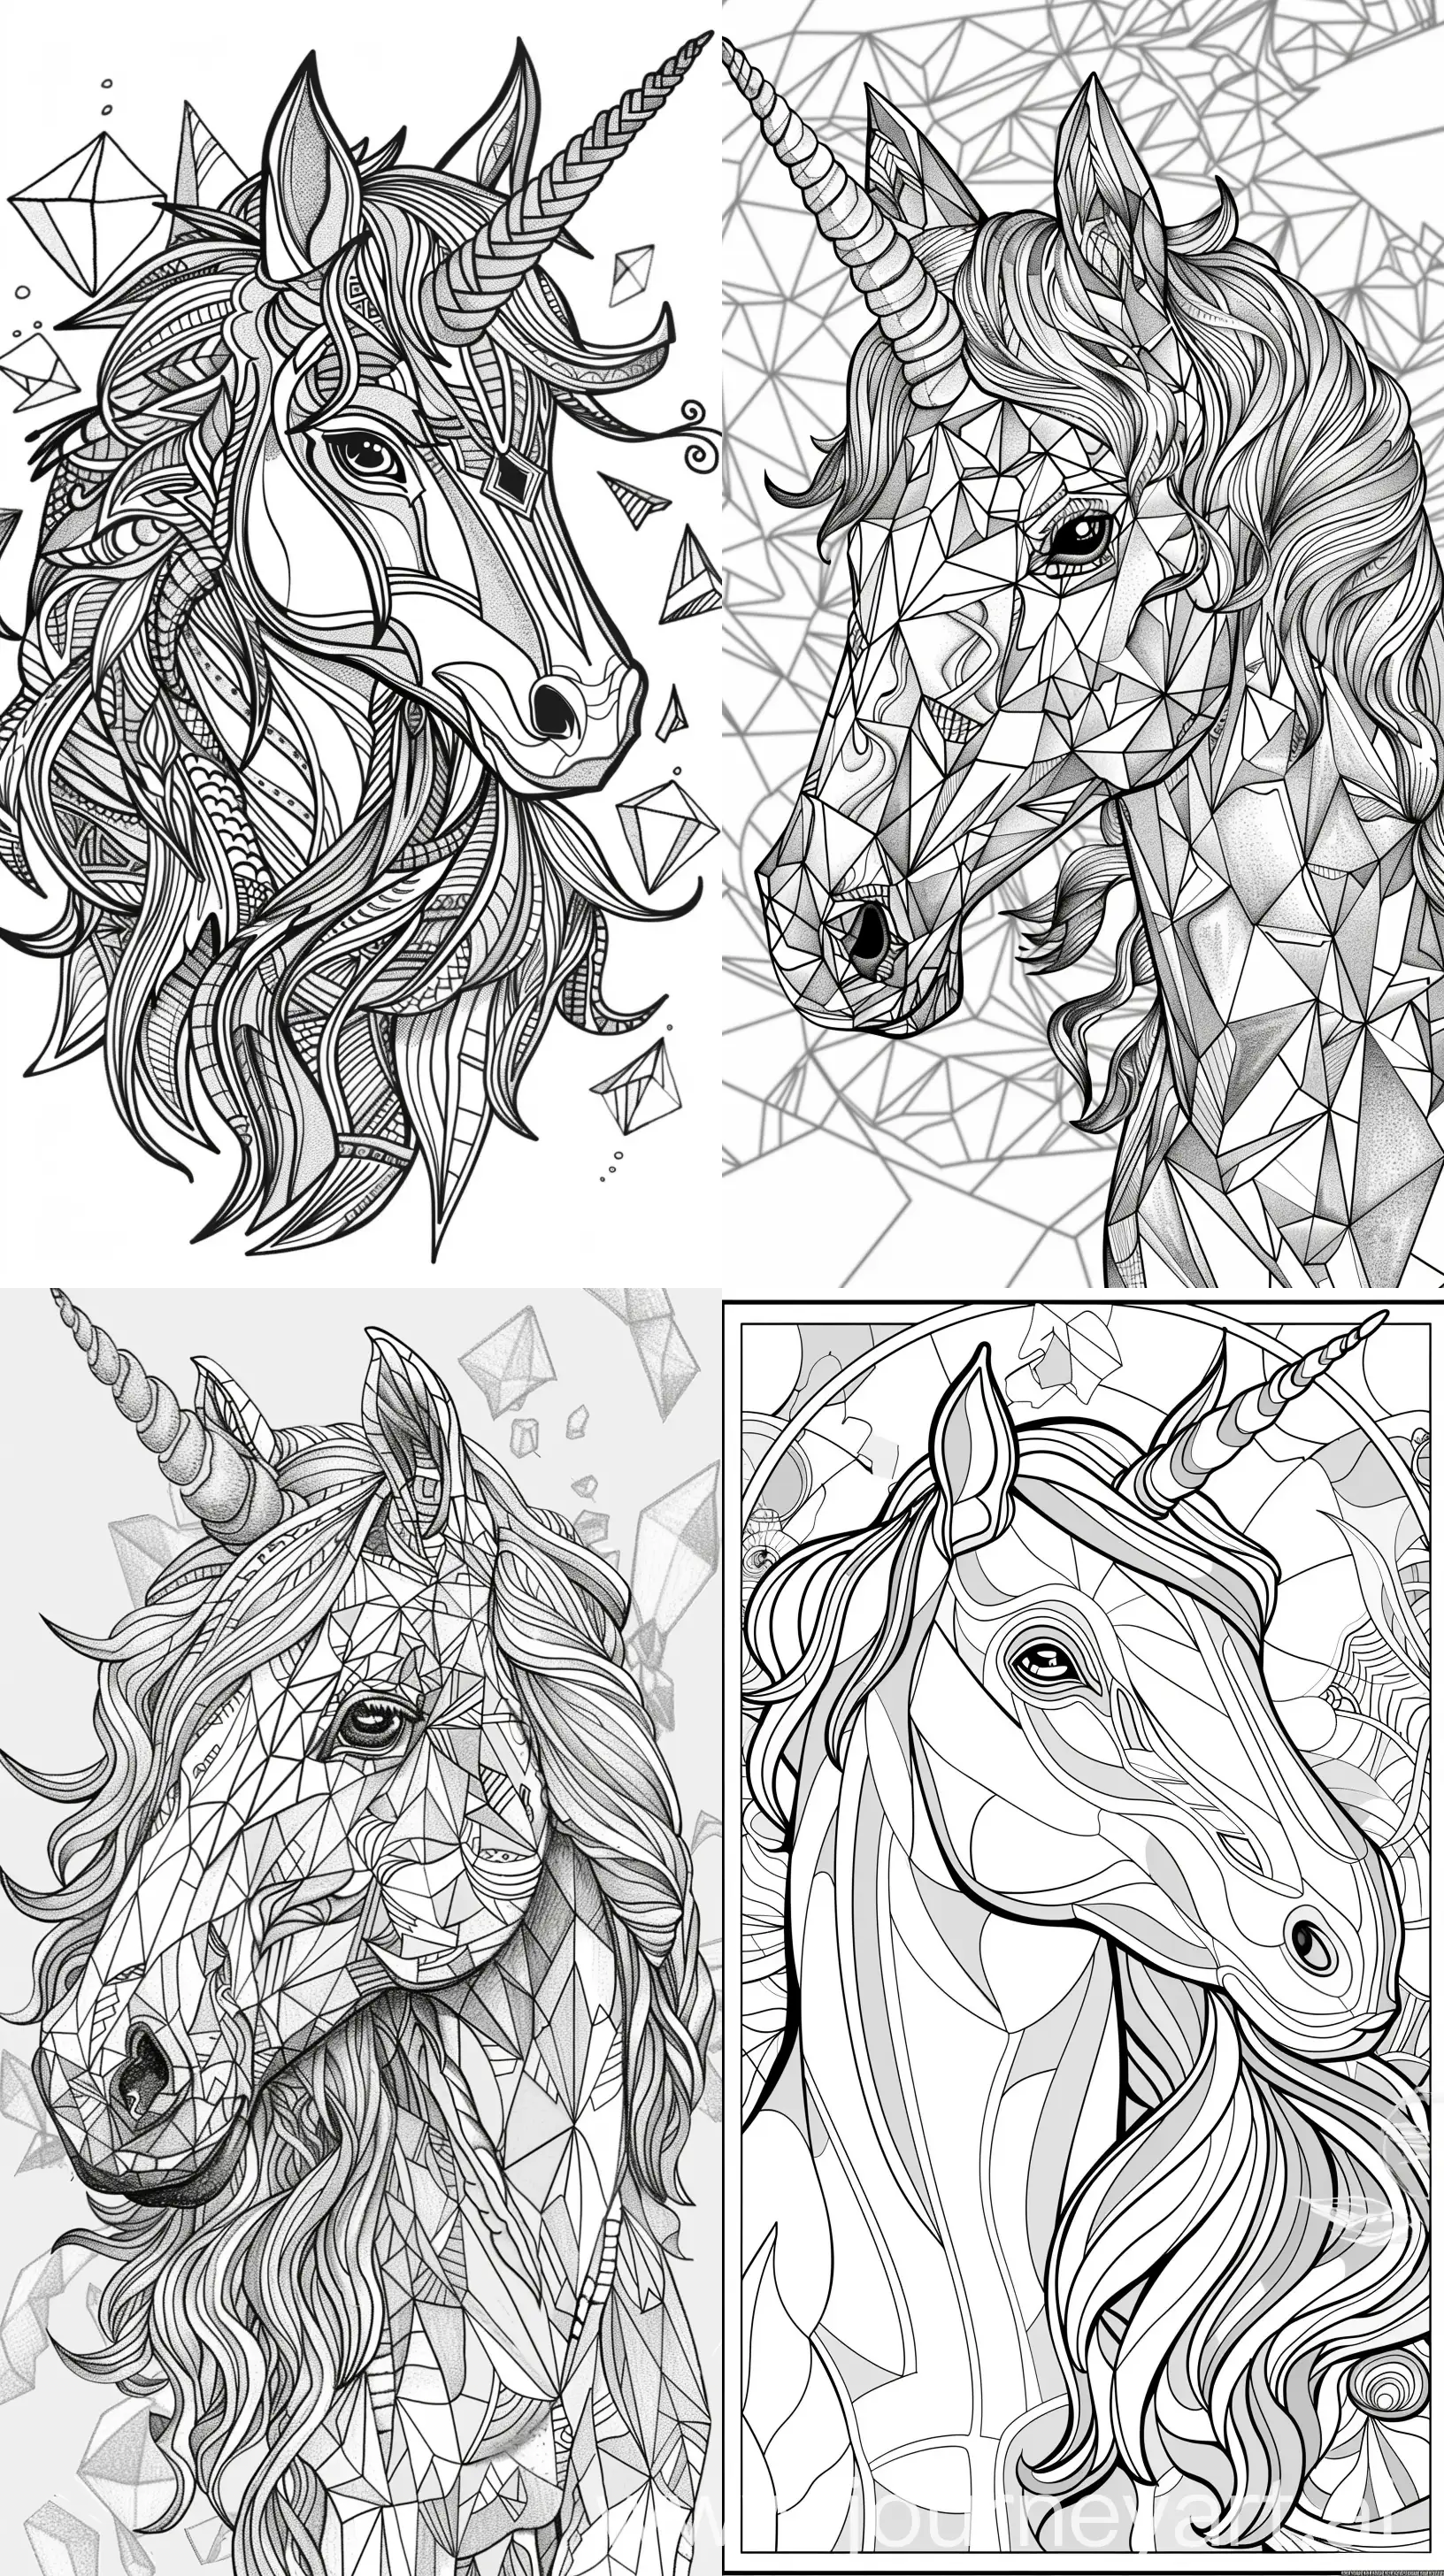 Whimsical-Unicorn-Coloring-Page-Playful-Childrens-Book-Style-Design